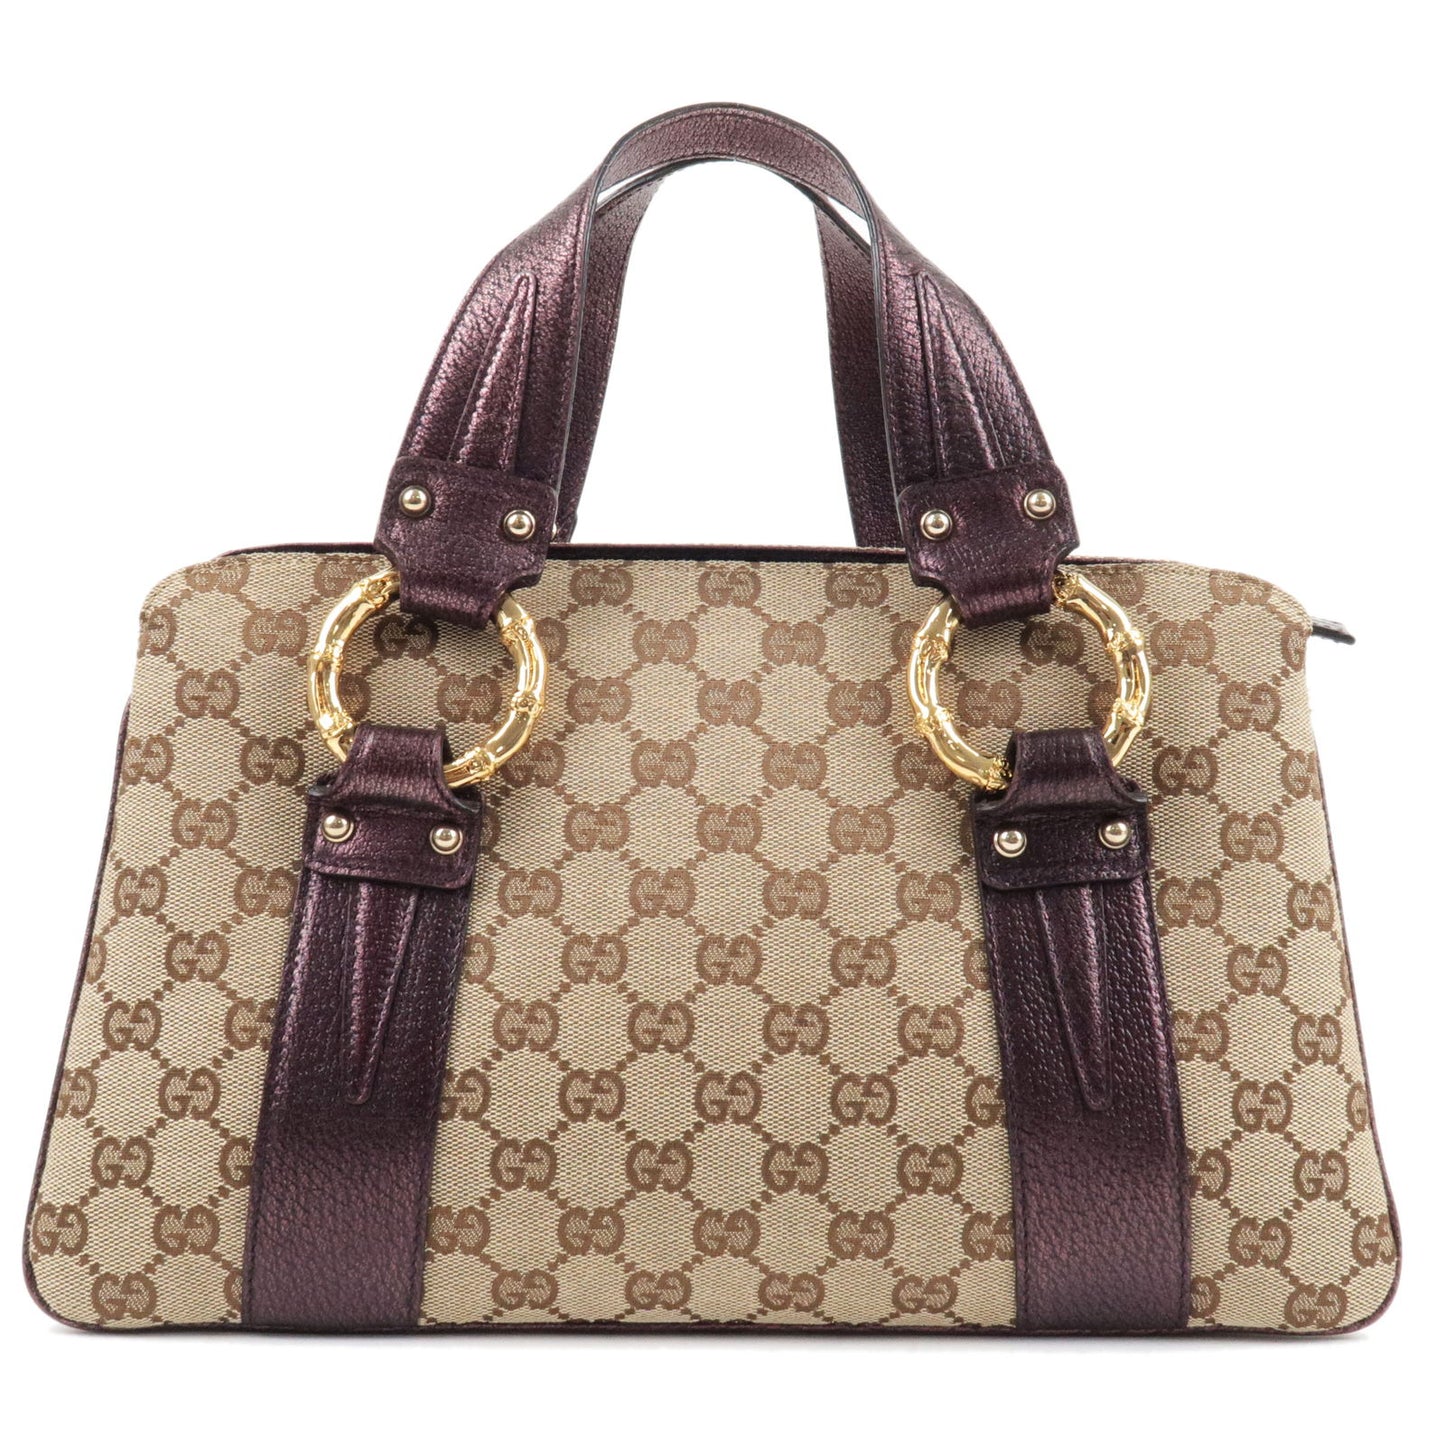 GUCCI-GG-Canvas-Leather-Hand-Bag-Purple-Beige-Brown-131324